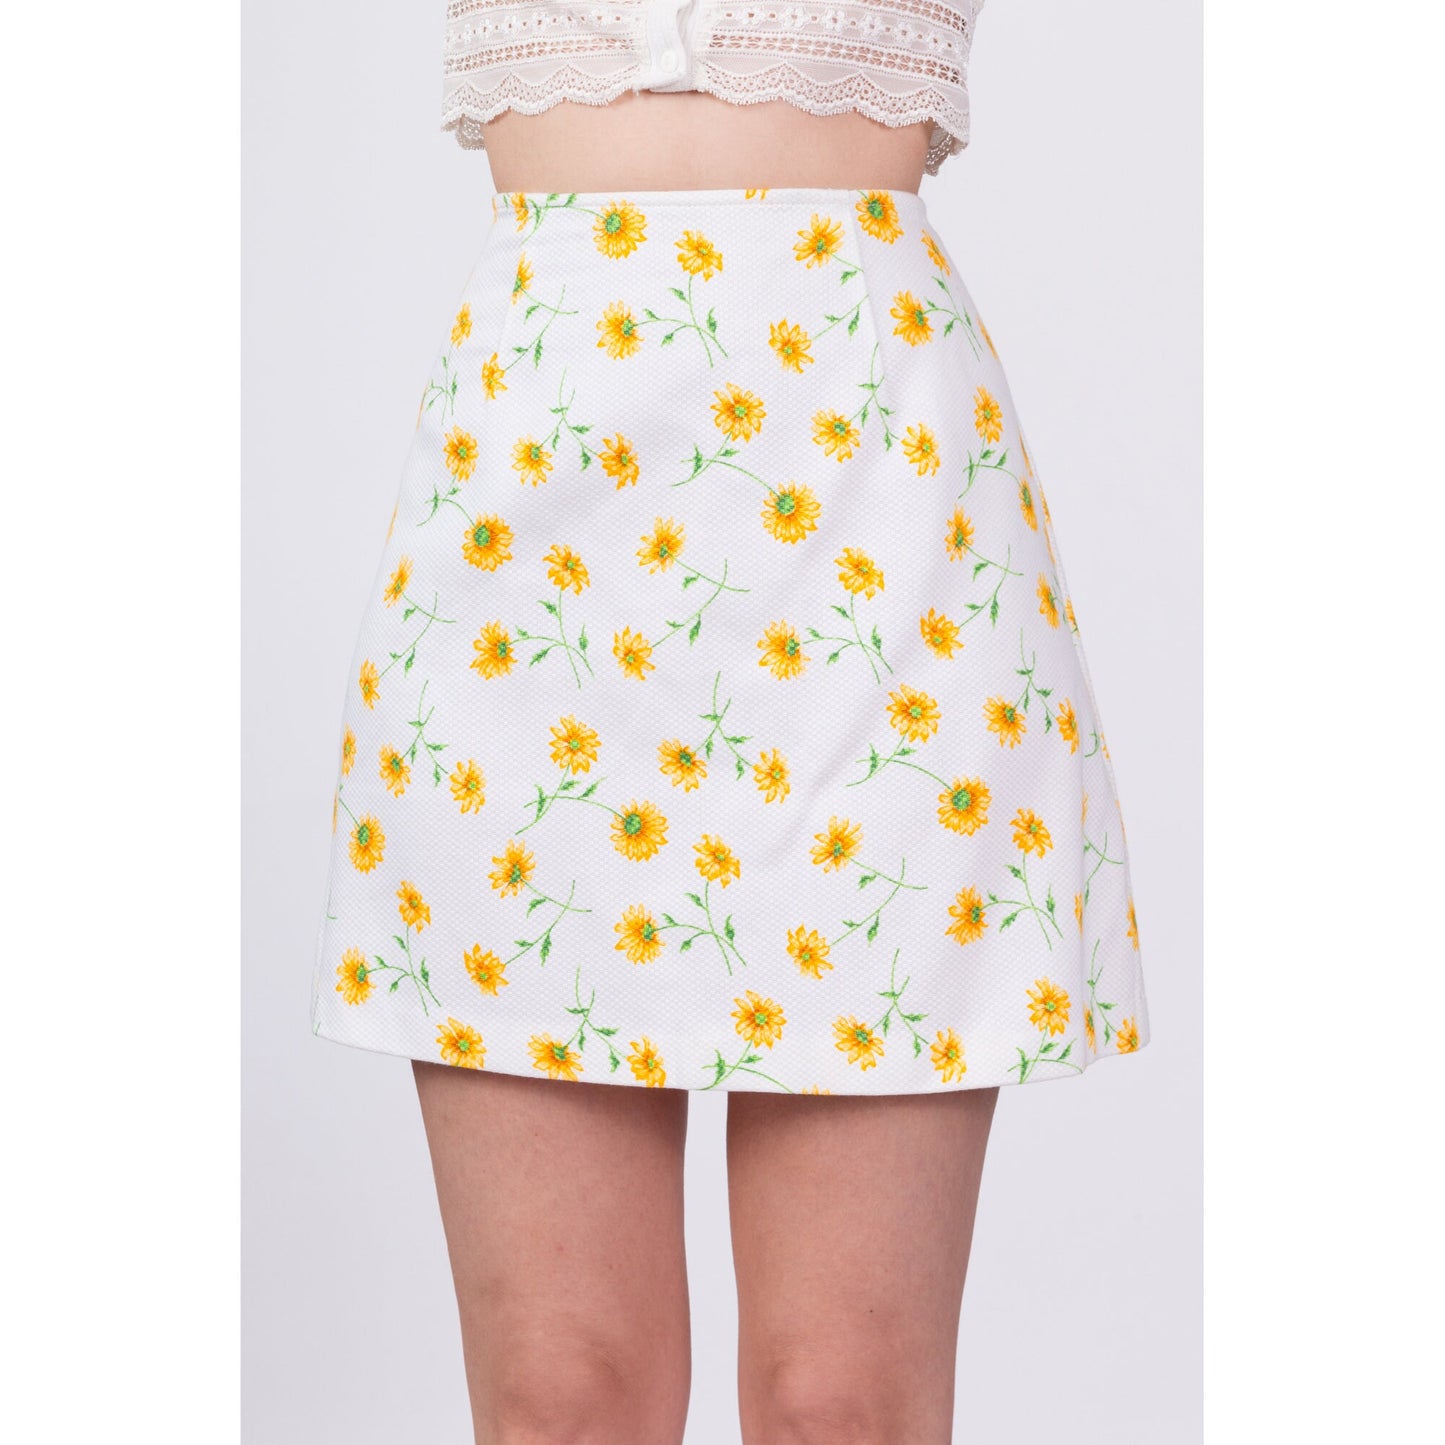 90s Express Floral Mini Skirt - Small, 26" 